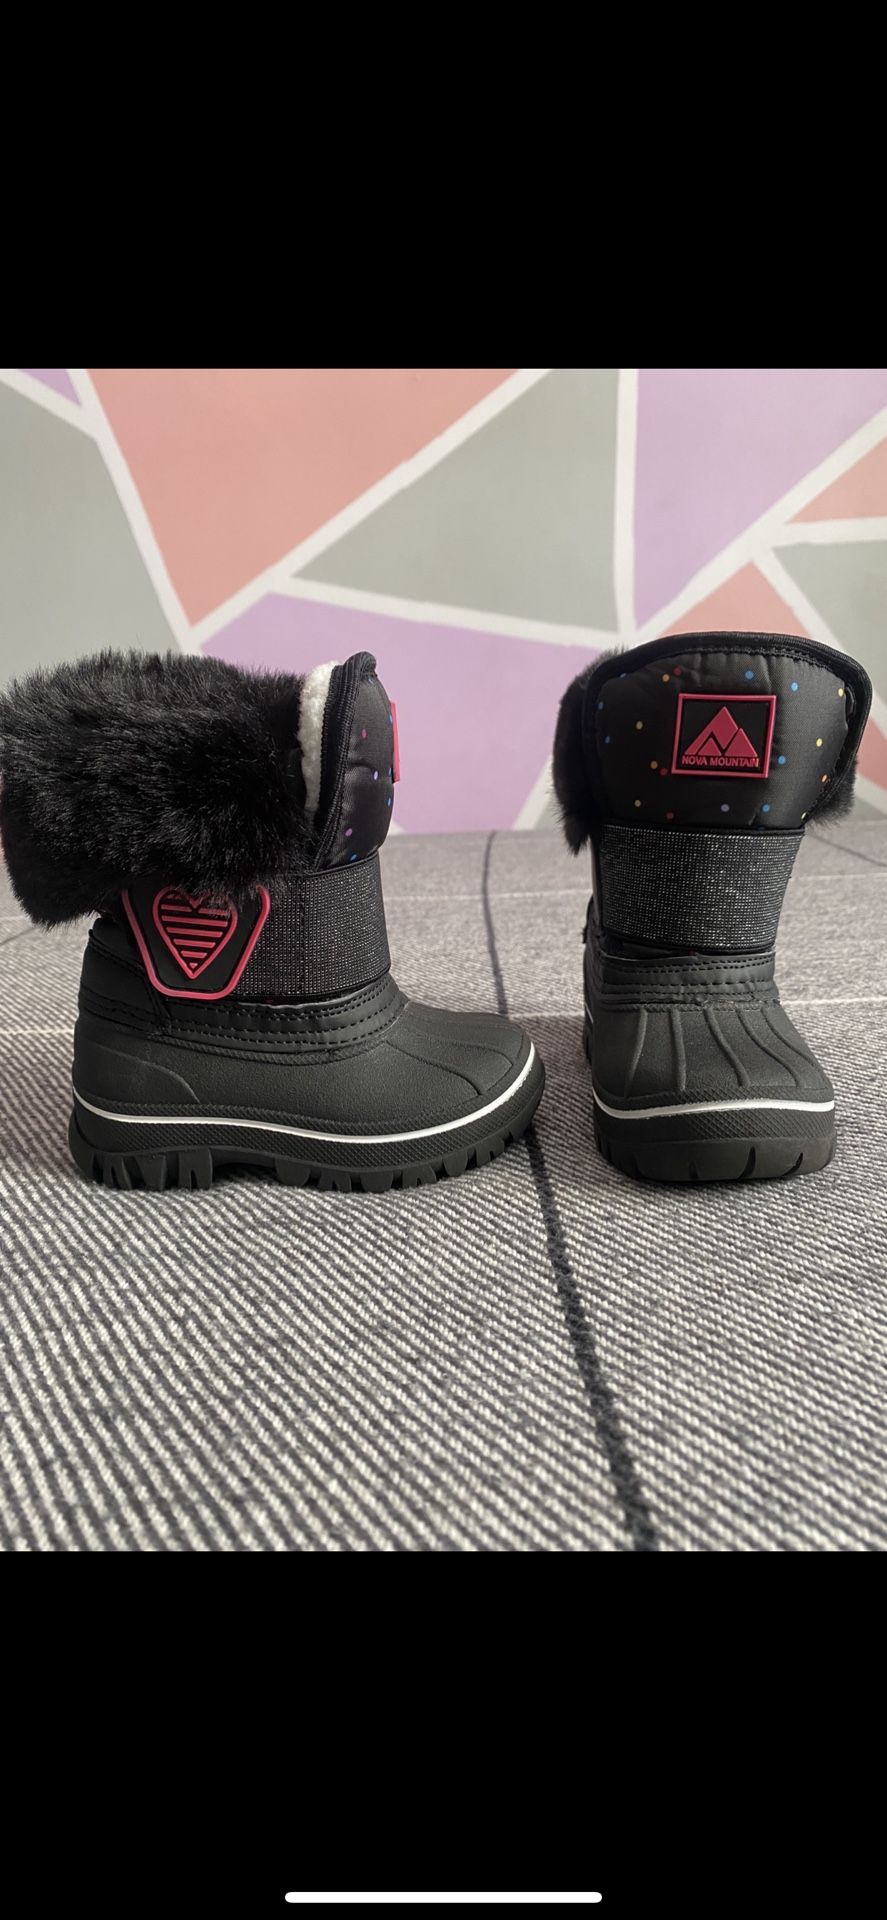 Toddler Girl Snow Boots Size 5